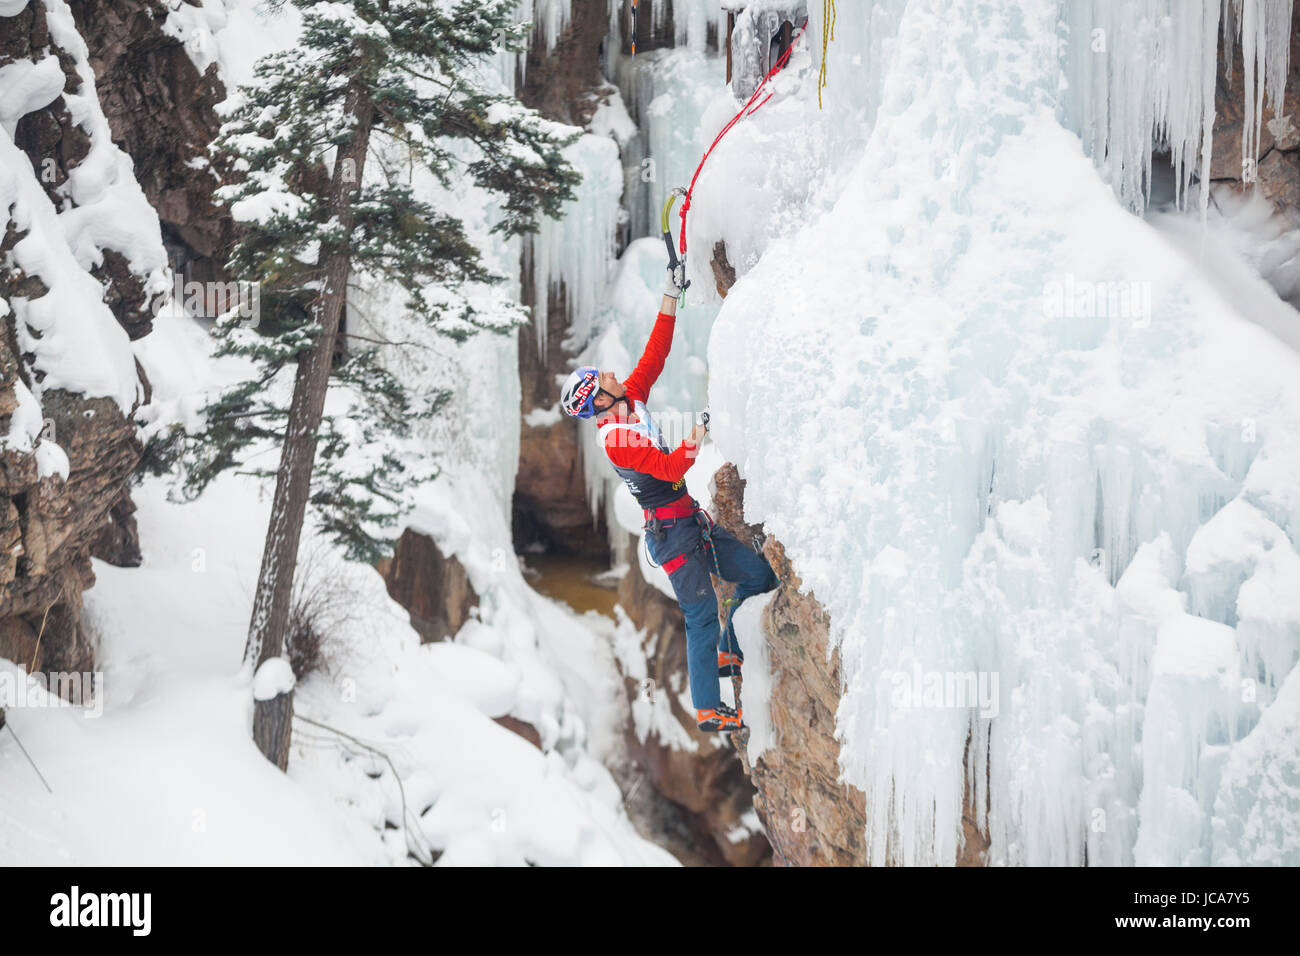 Will Gadd competes in the 2016 Ouray Ice Festival Elite Mixed Climbing Competition at the Ice Park in Ouray, Colorado. Gadd placed seventh in the men's division. Stock Photo